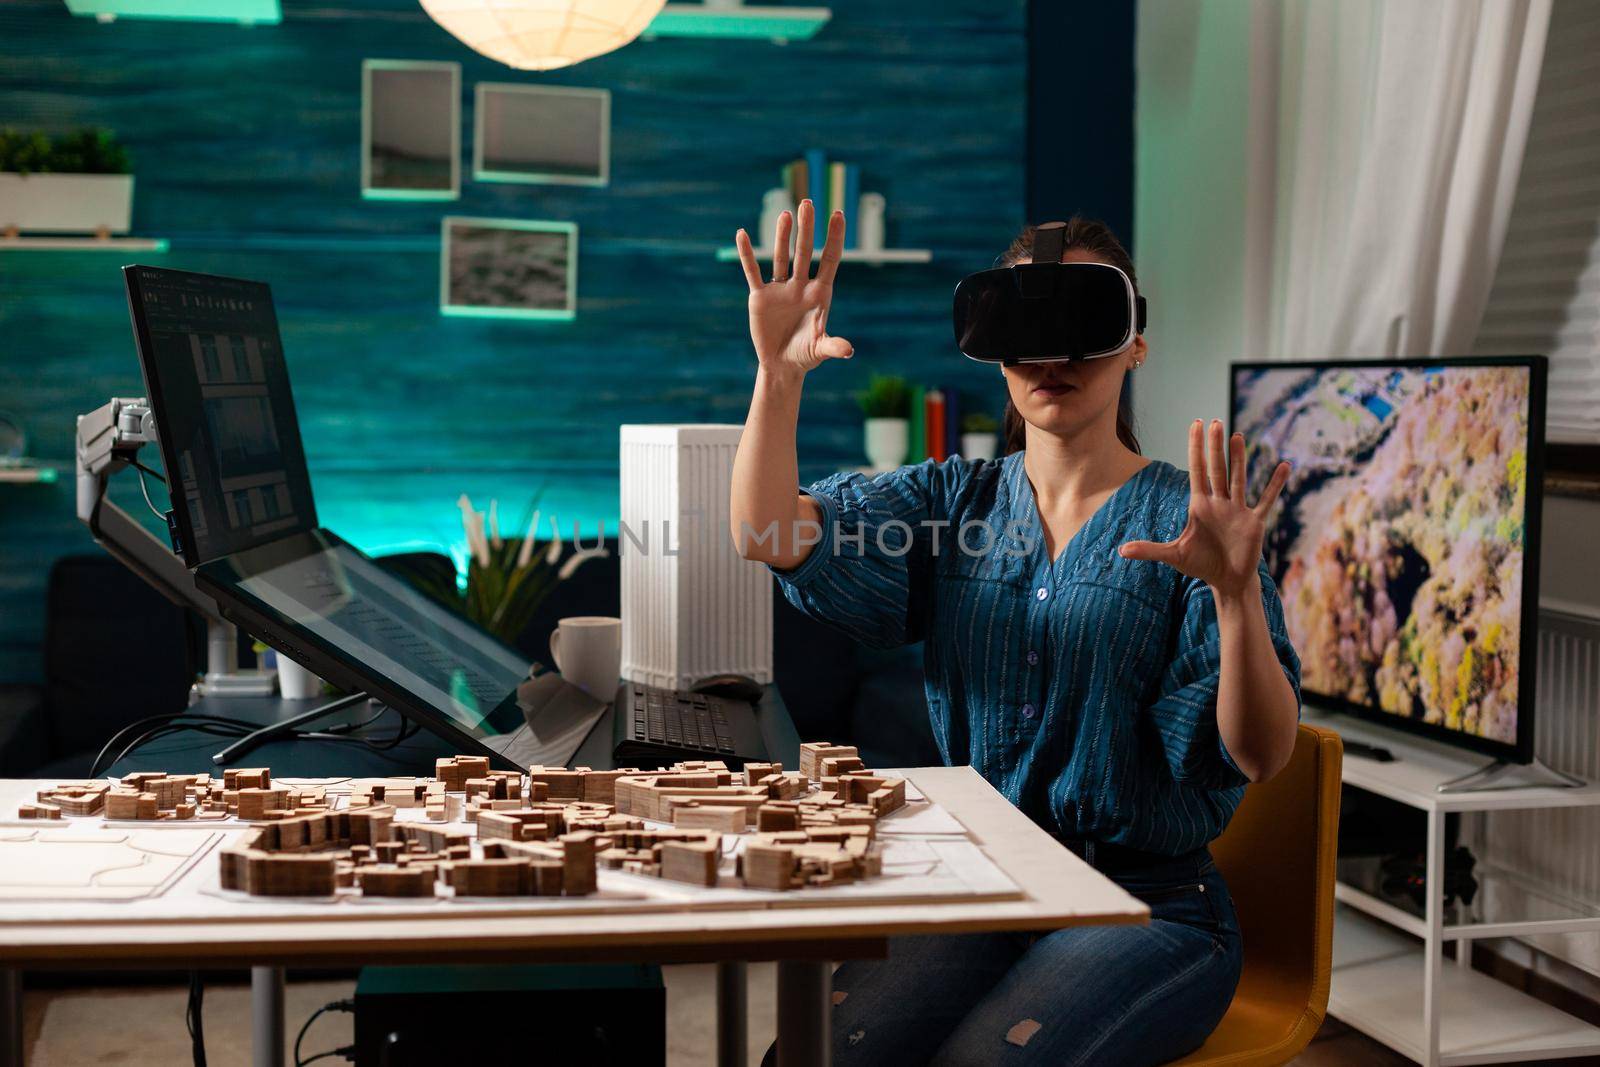 Modern business woman with vr glasses for innovation development vision using interactive software. Virtual designer working on holographic simulation experience for building model